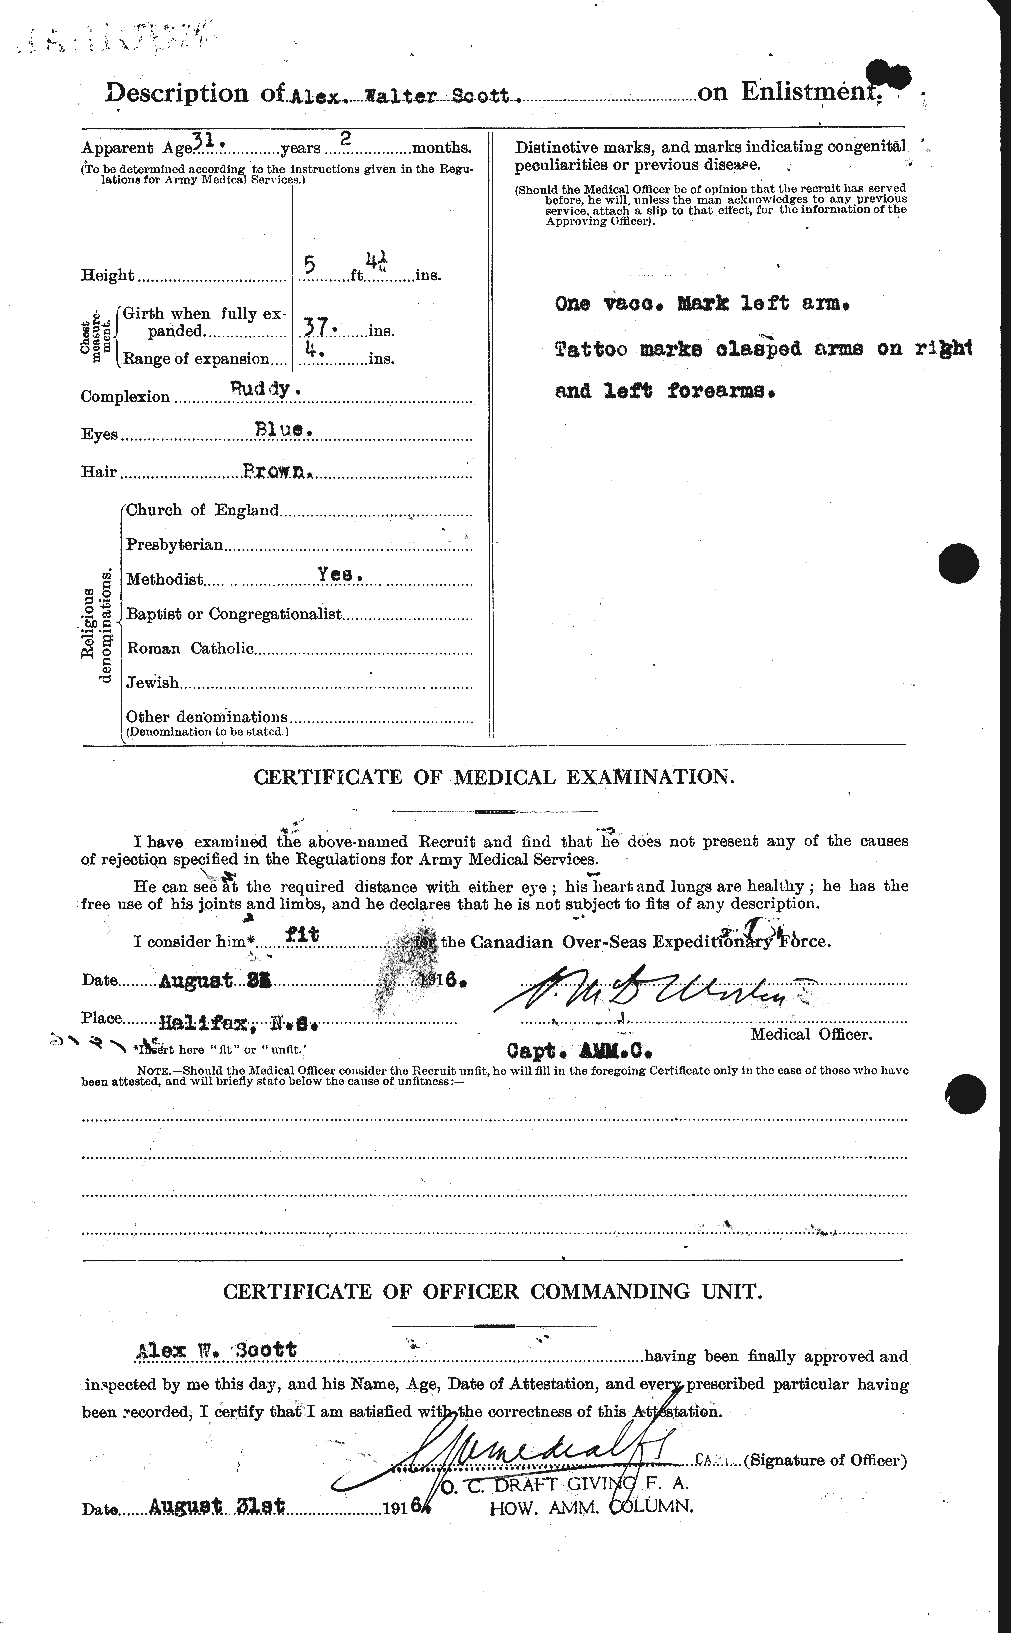 Personnel Records of the First World War - CEF 086590b